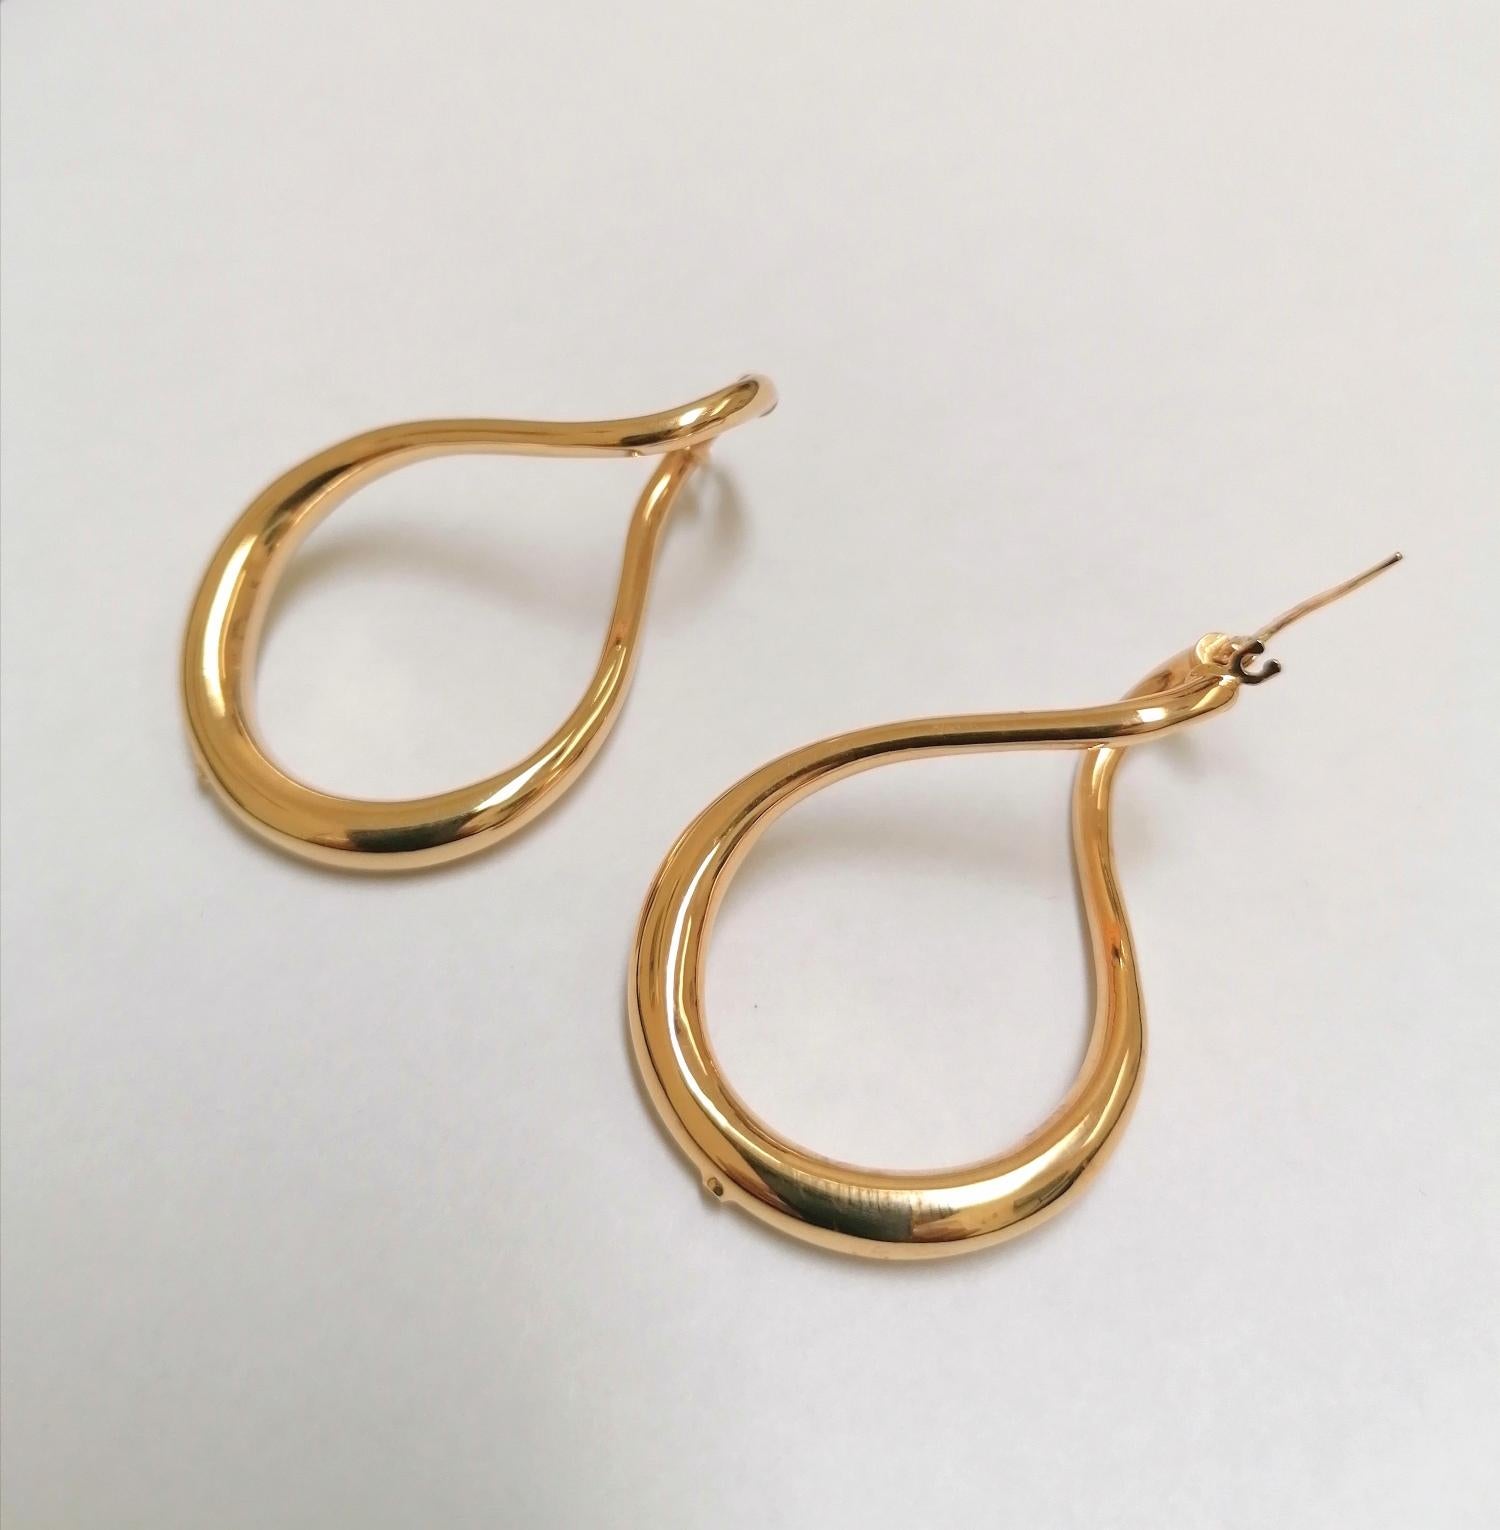 Very funny pair of 18 karats yellow gold hoops with a curvy design that gives a modern look. Wearable on all occasions because of its versatility. You can fit it during the day with a casual look or in a evening cocktail. Magnificent electroforming